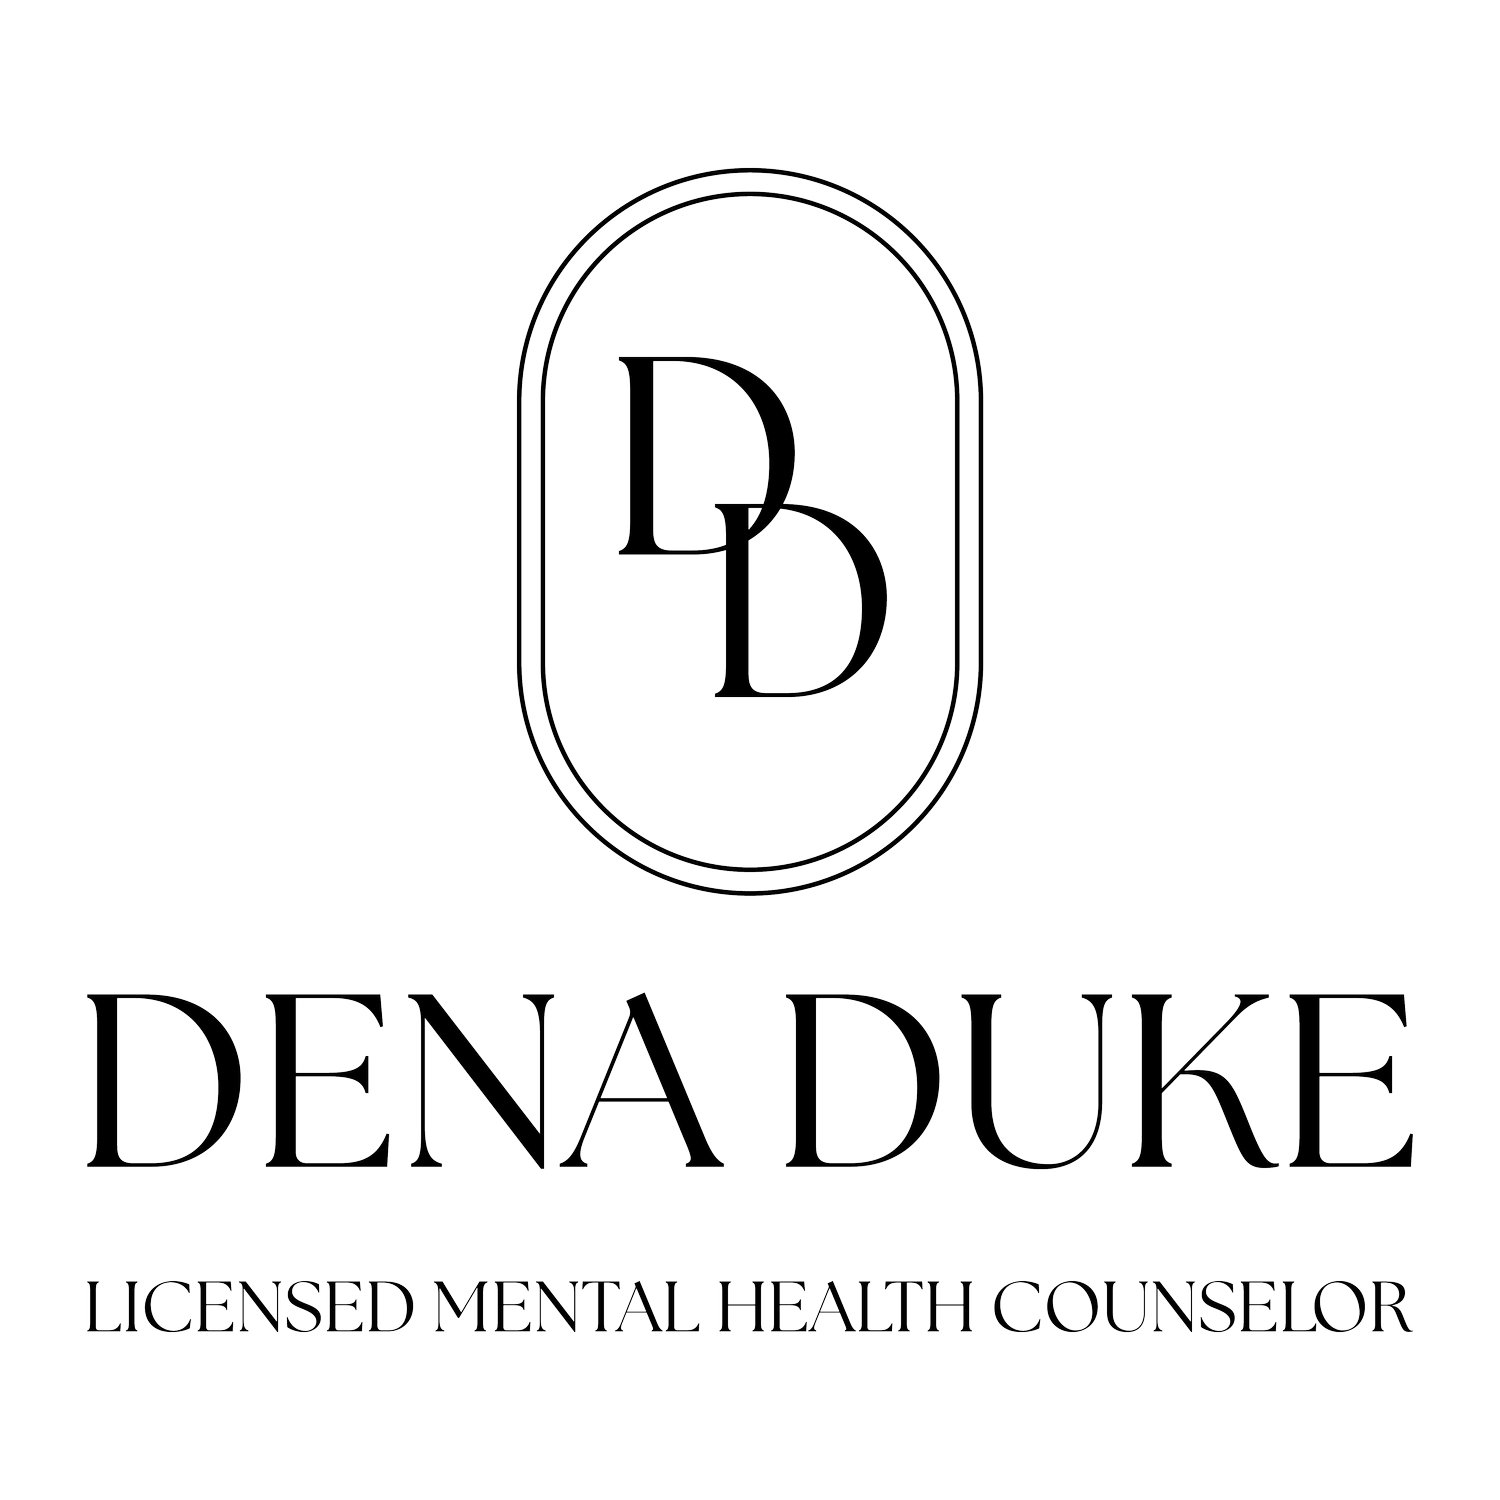 Dena Duke is a Licensed Mental Health Counselor (LMHC), specializing in trauma therapy. Dena is licensed to provide psychotherapy in New York and Florida.